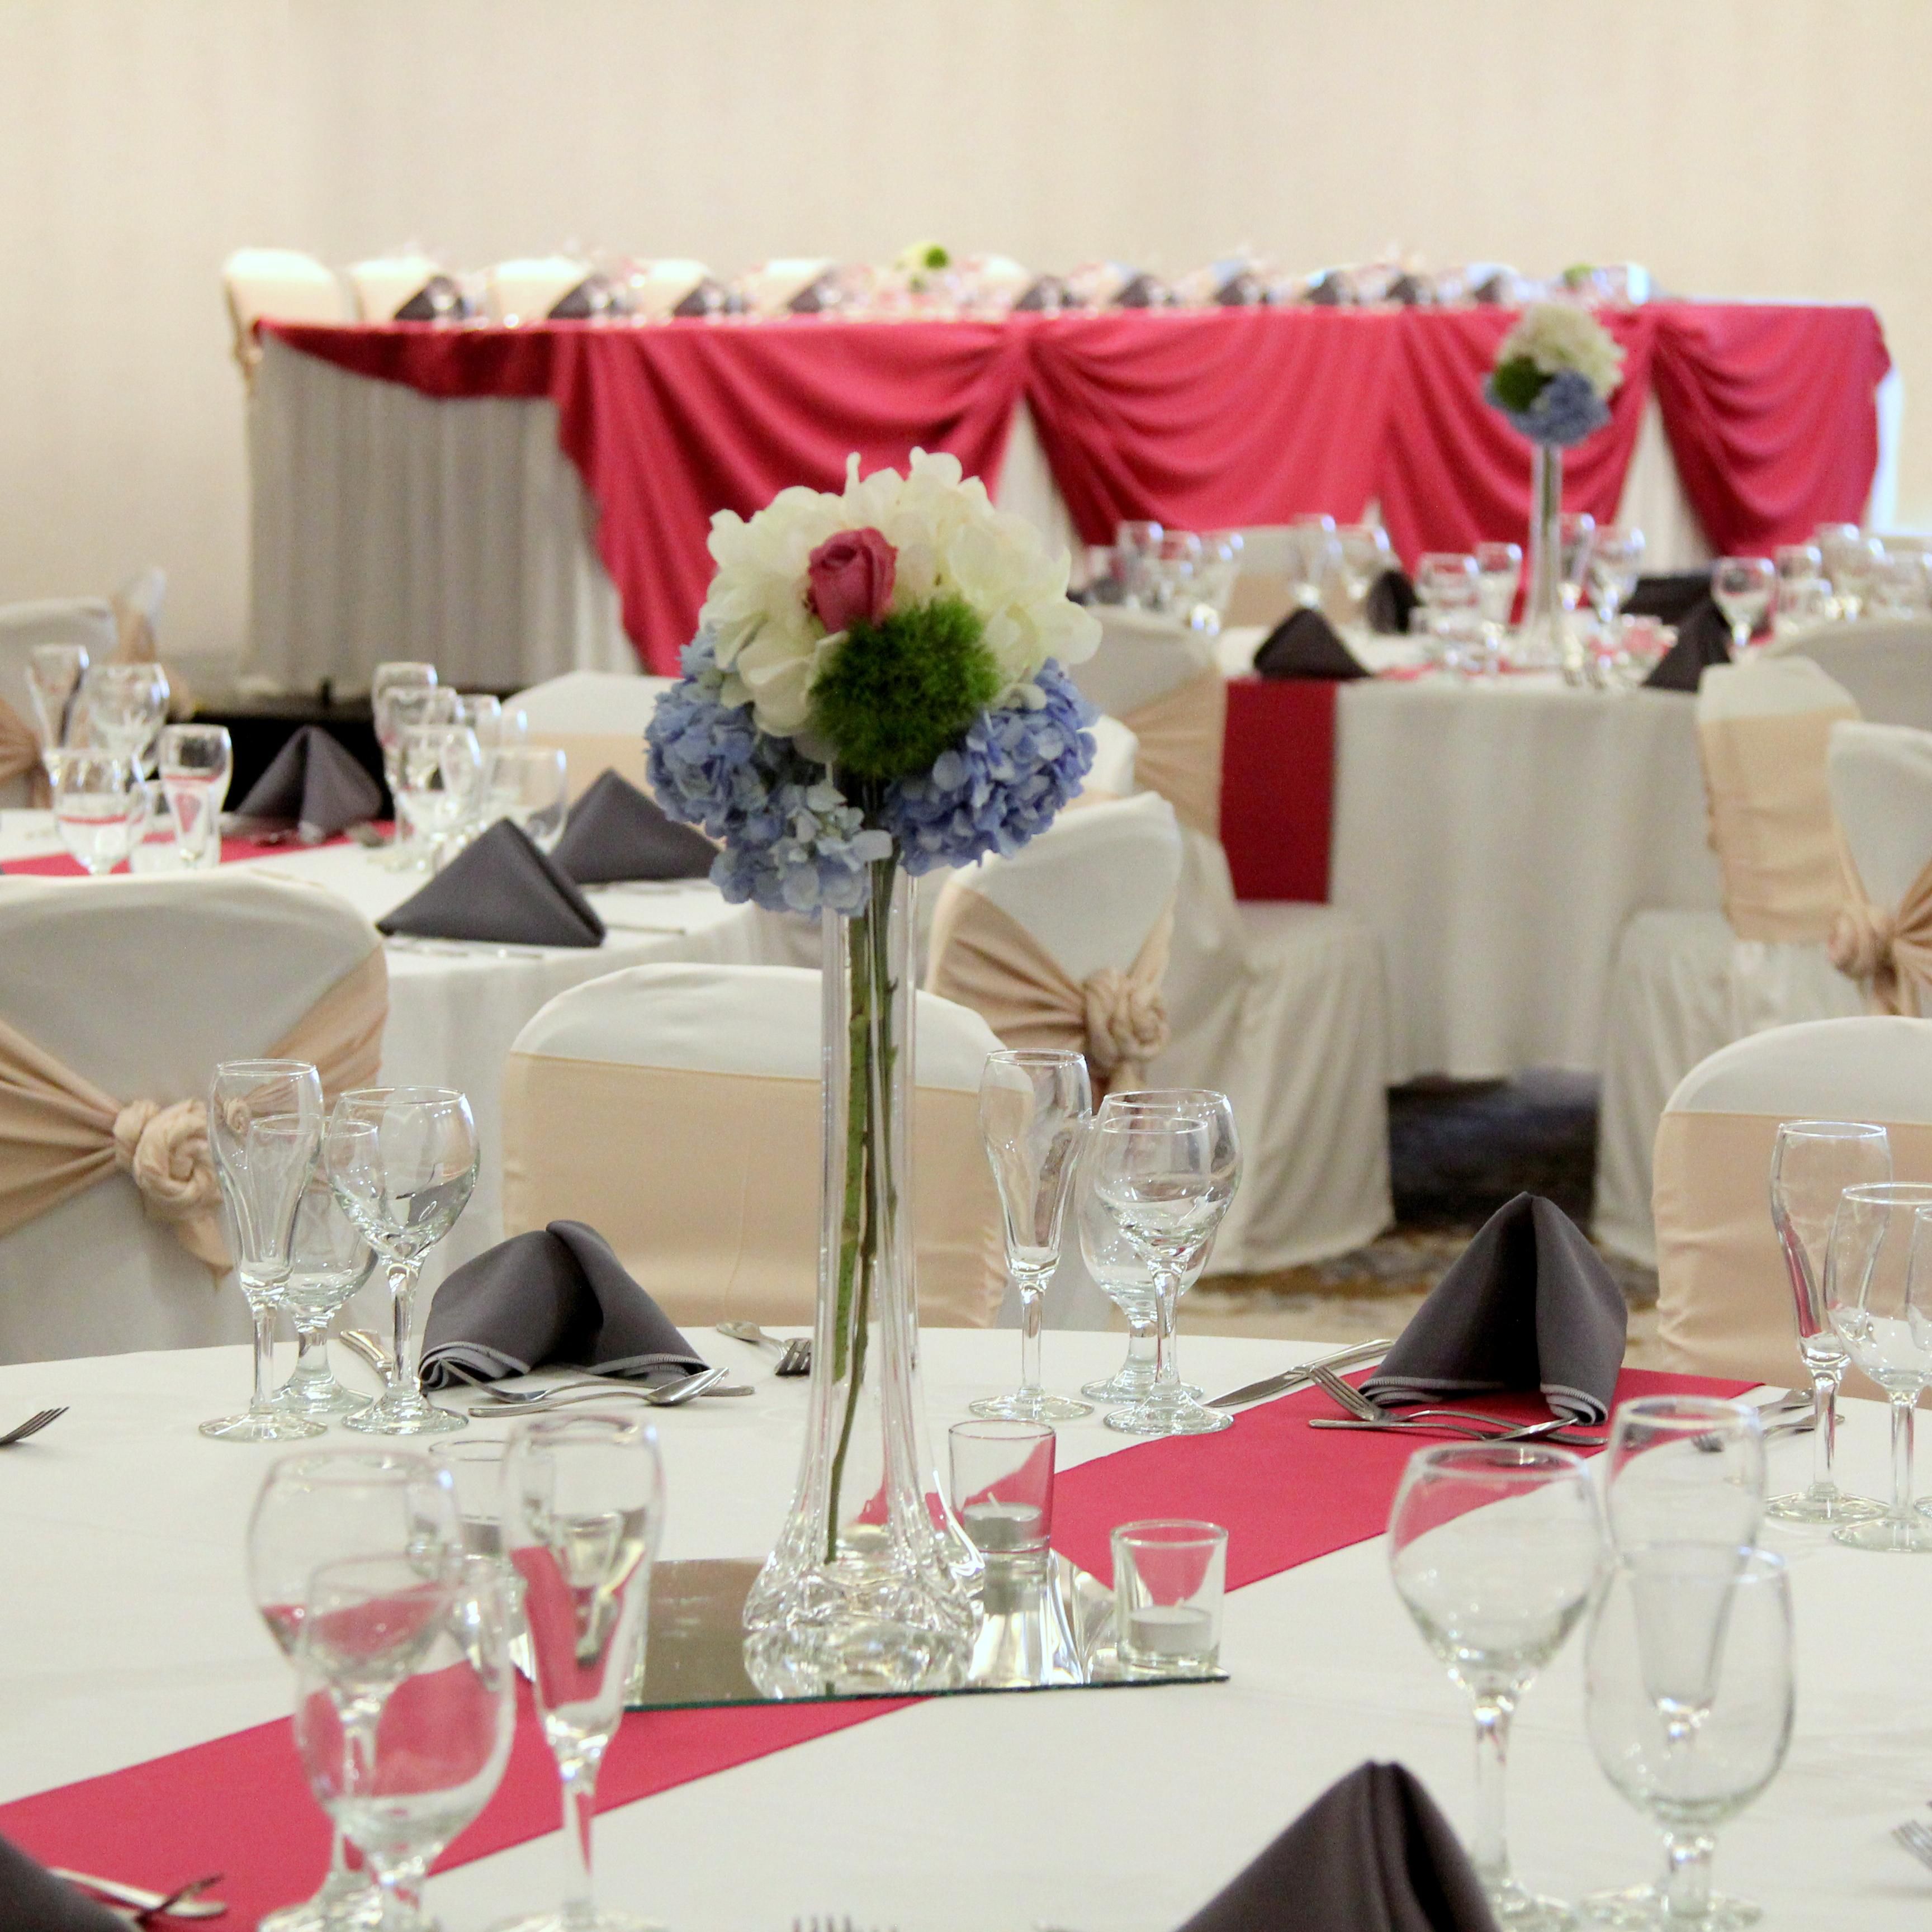 Let us plan your event in our newly renovated Lincoln Ballroom